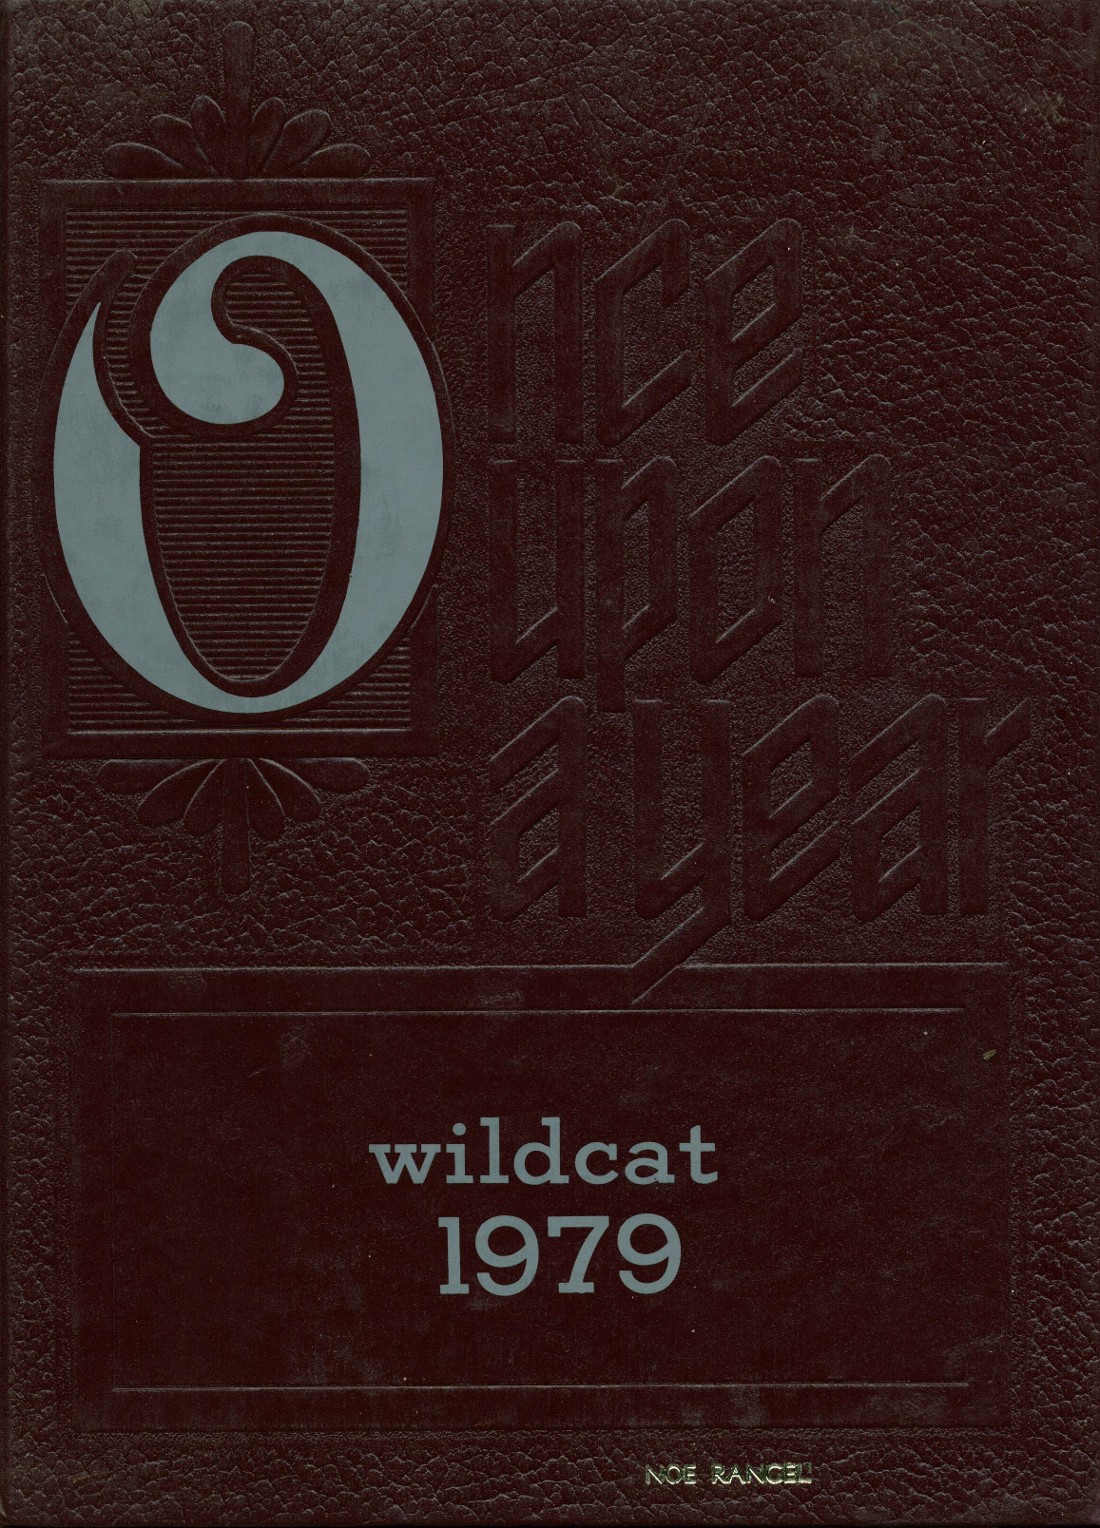 1979 yearbook from Littlefield High School from Littlefield, Texas for sale